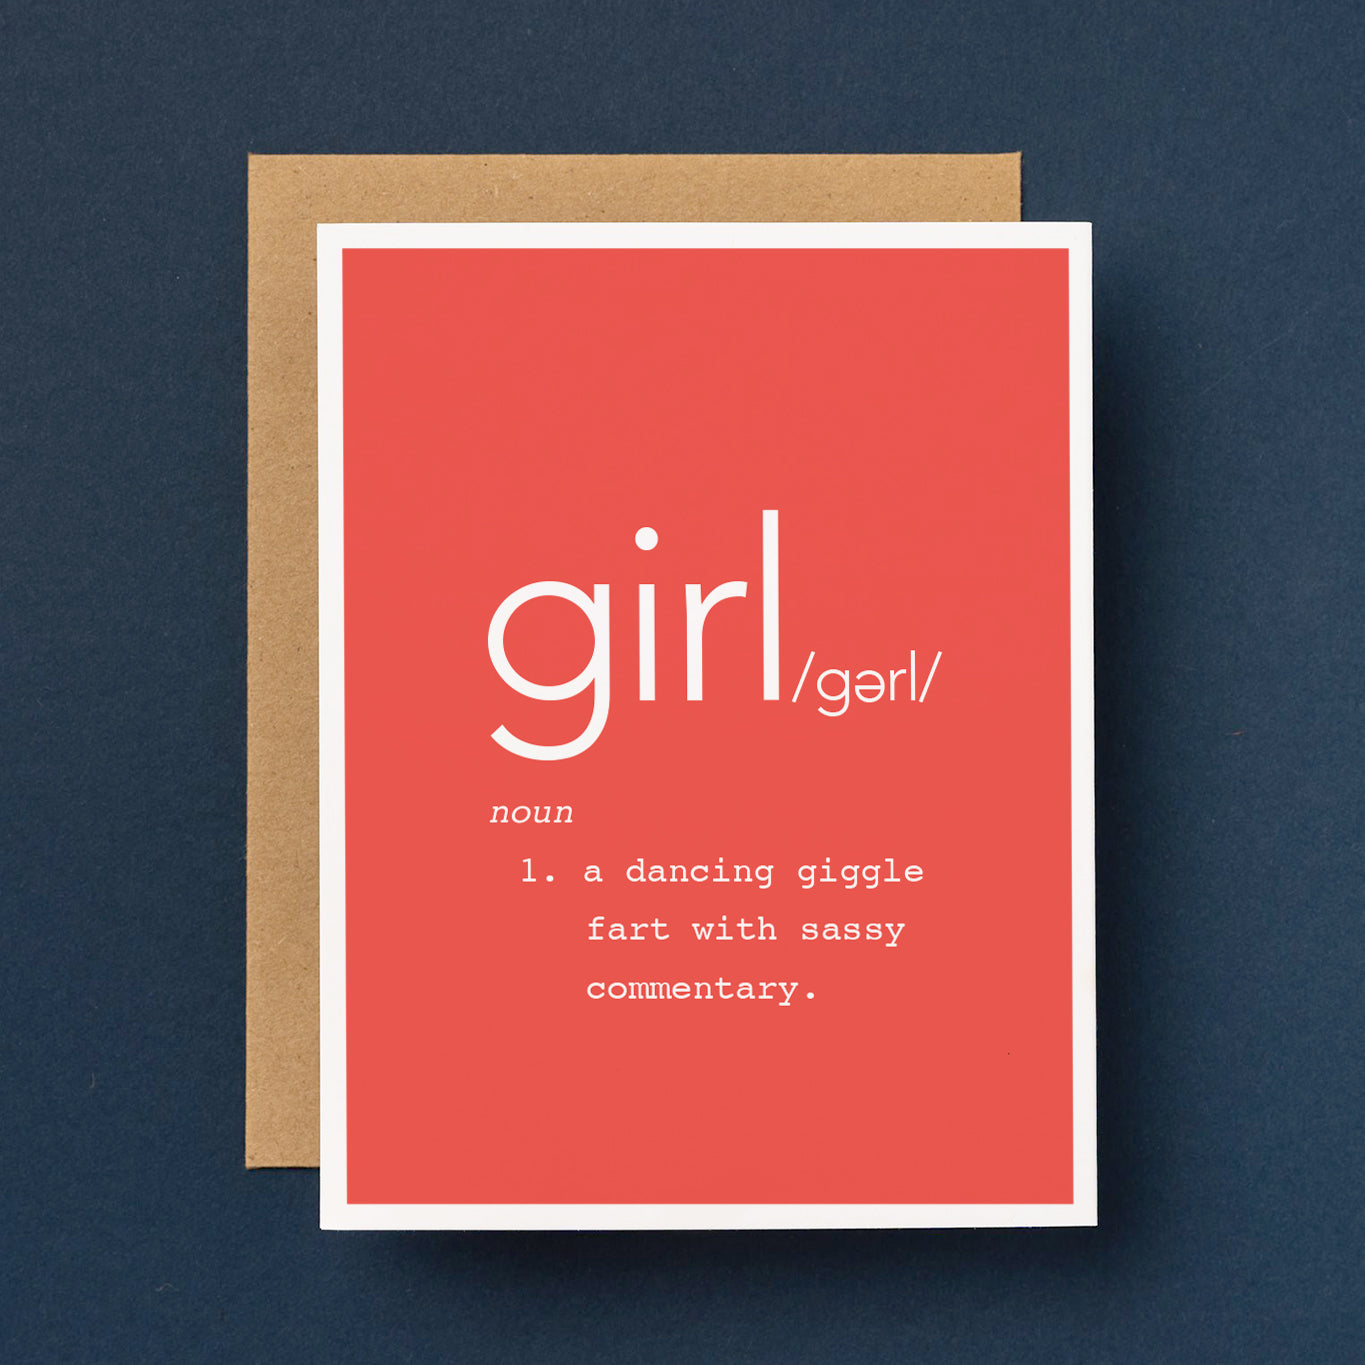 An honest greeting card about baby girls. The front side reads "girl /gerl/ noun, 1. a dancing giggle fart with sassy commentary."